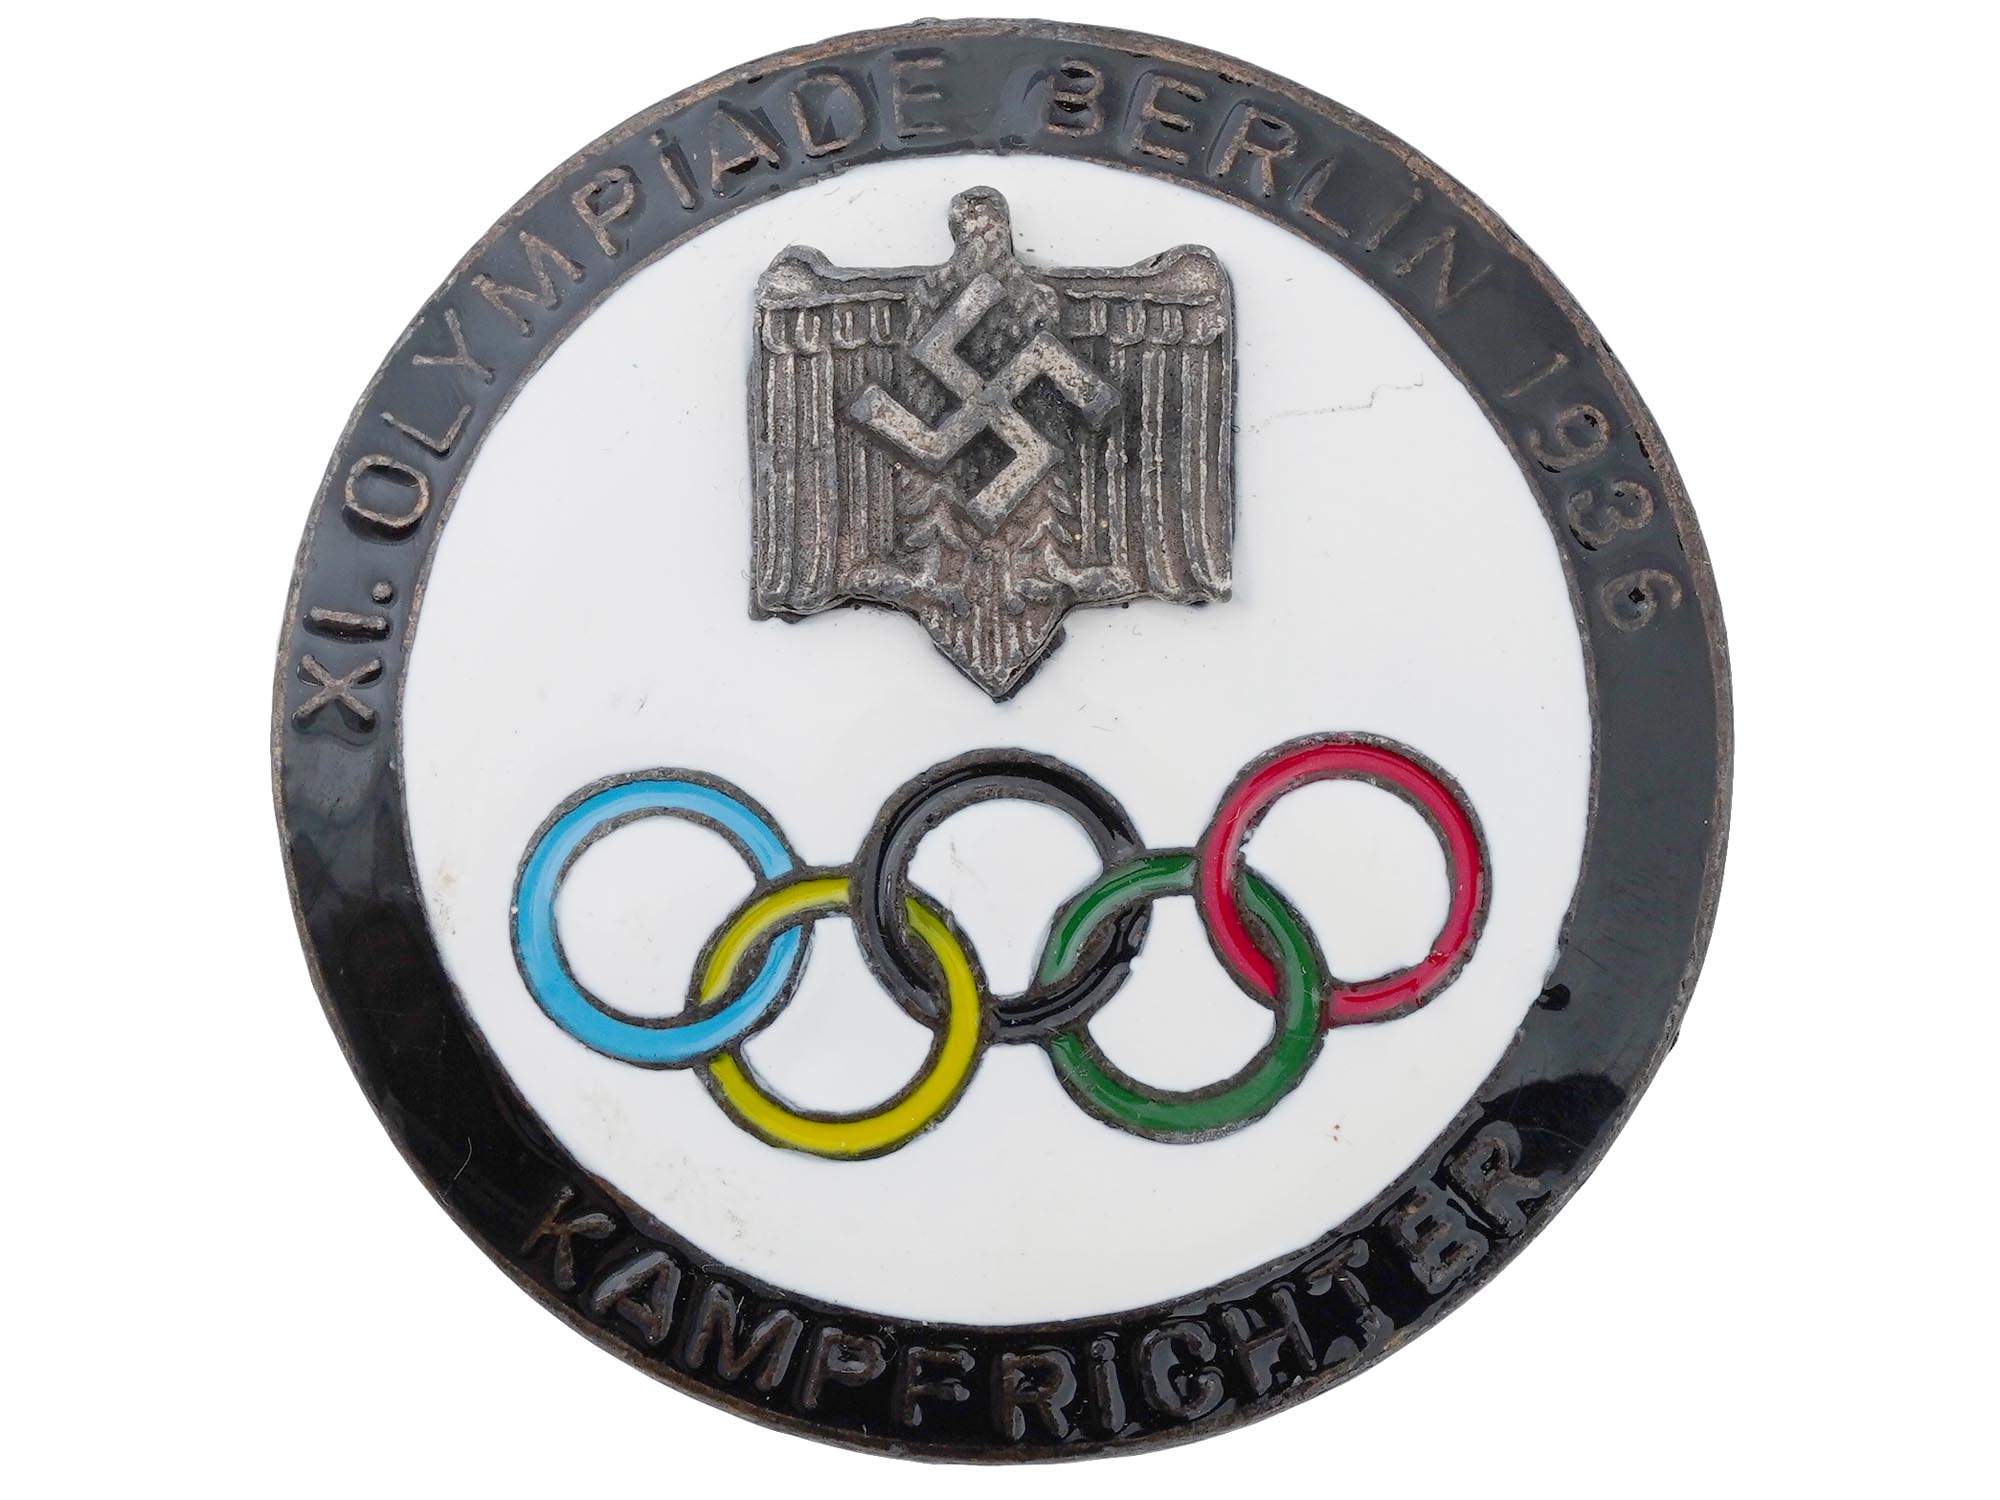 GROUP OF 2 BERLIN 1936 OLYMPIC GAMES BADGES PIC-2